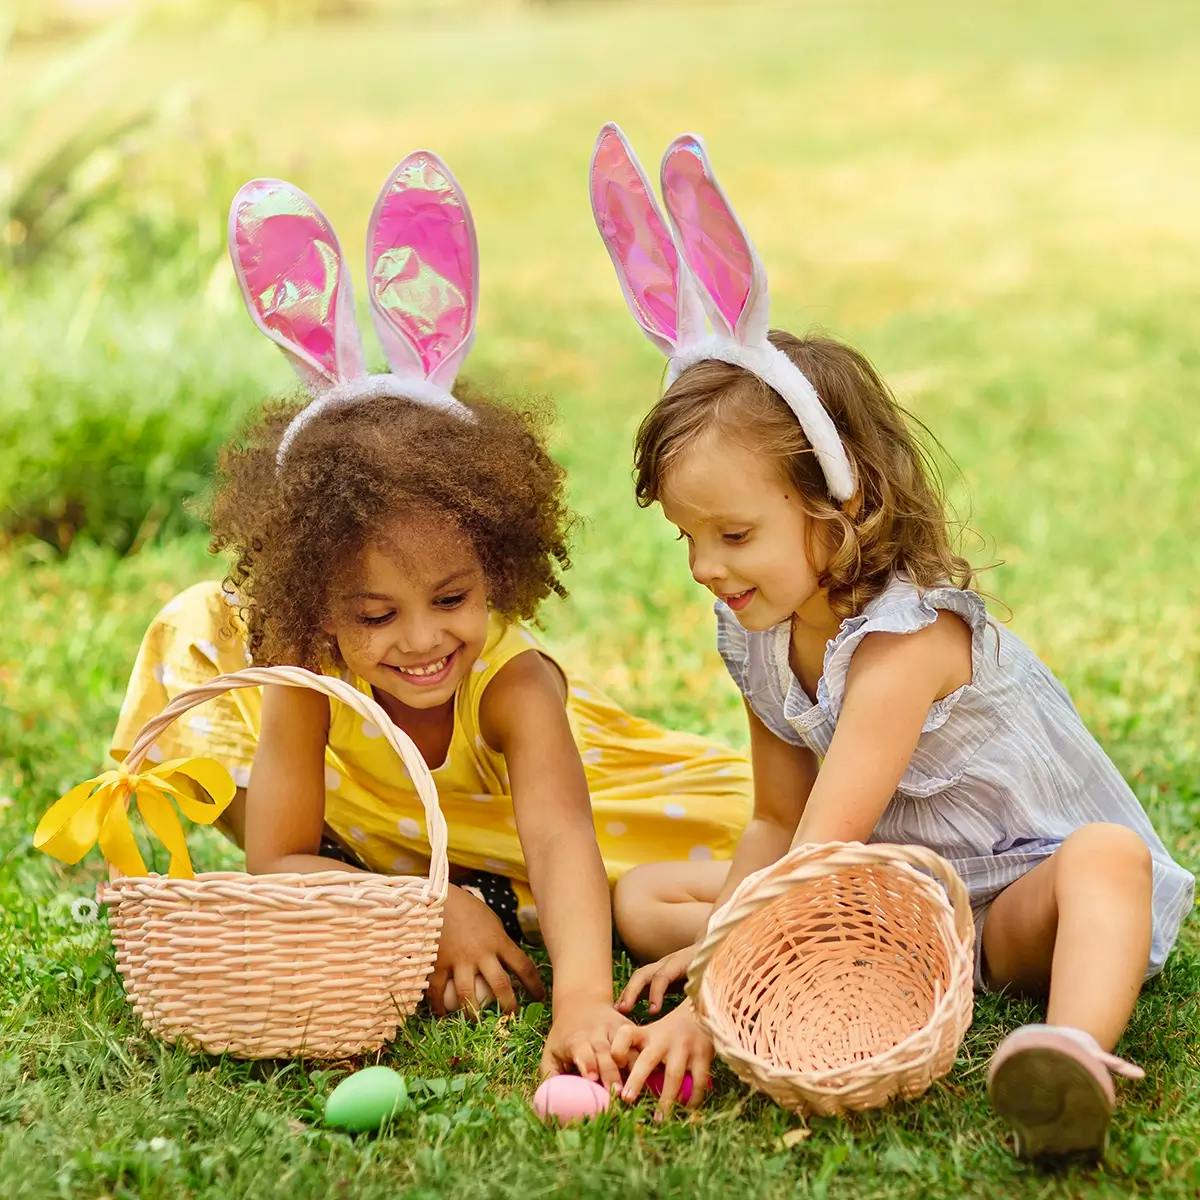 Two young girls with Easter baskets, finding eggs during an Easter egg hunt.